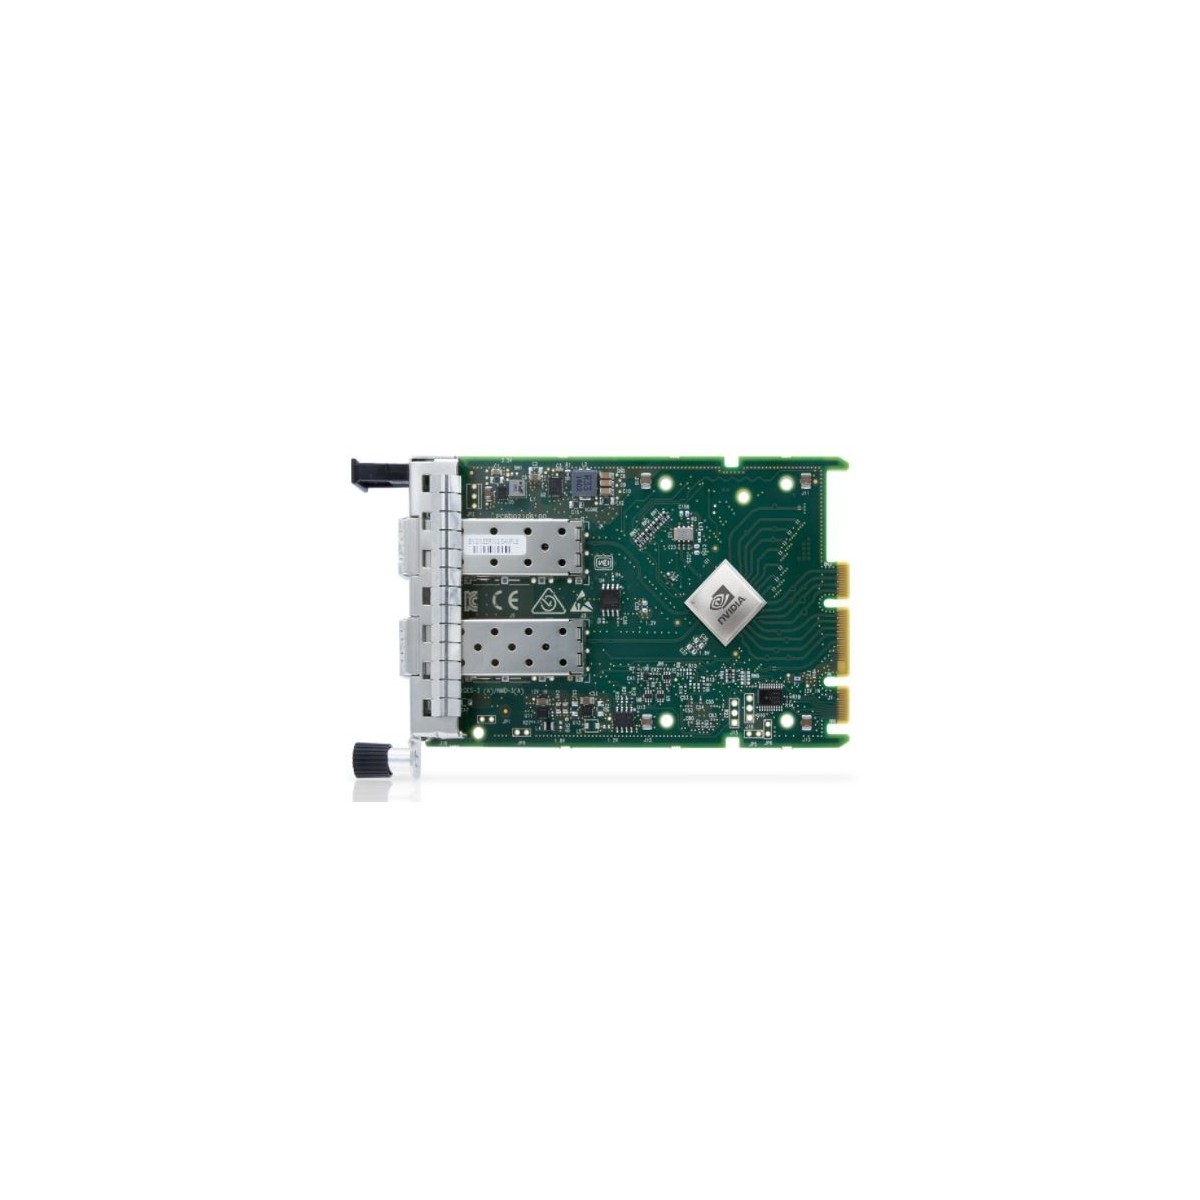 NVIDIA CONNECTX -6 LX EN ADAPTER CARD 25GBE OCP3.0 WITH HOST MANAGEMENT DUAL-PORT SFP28